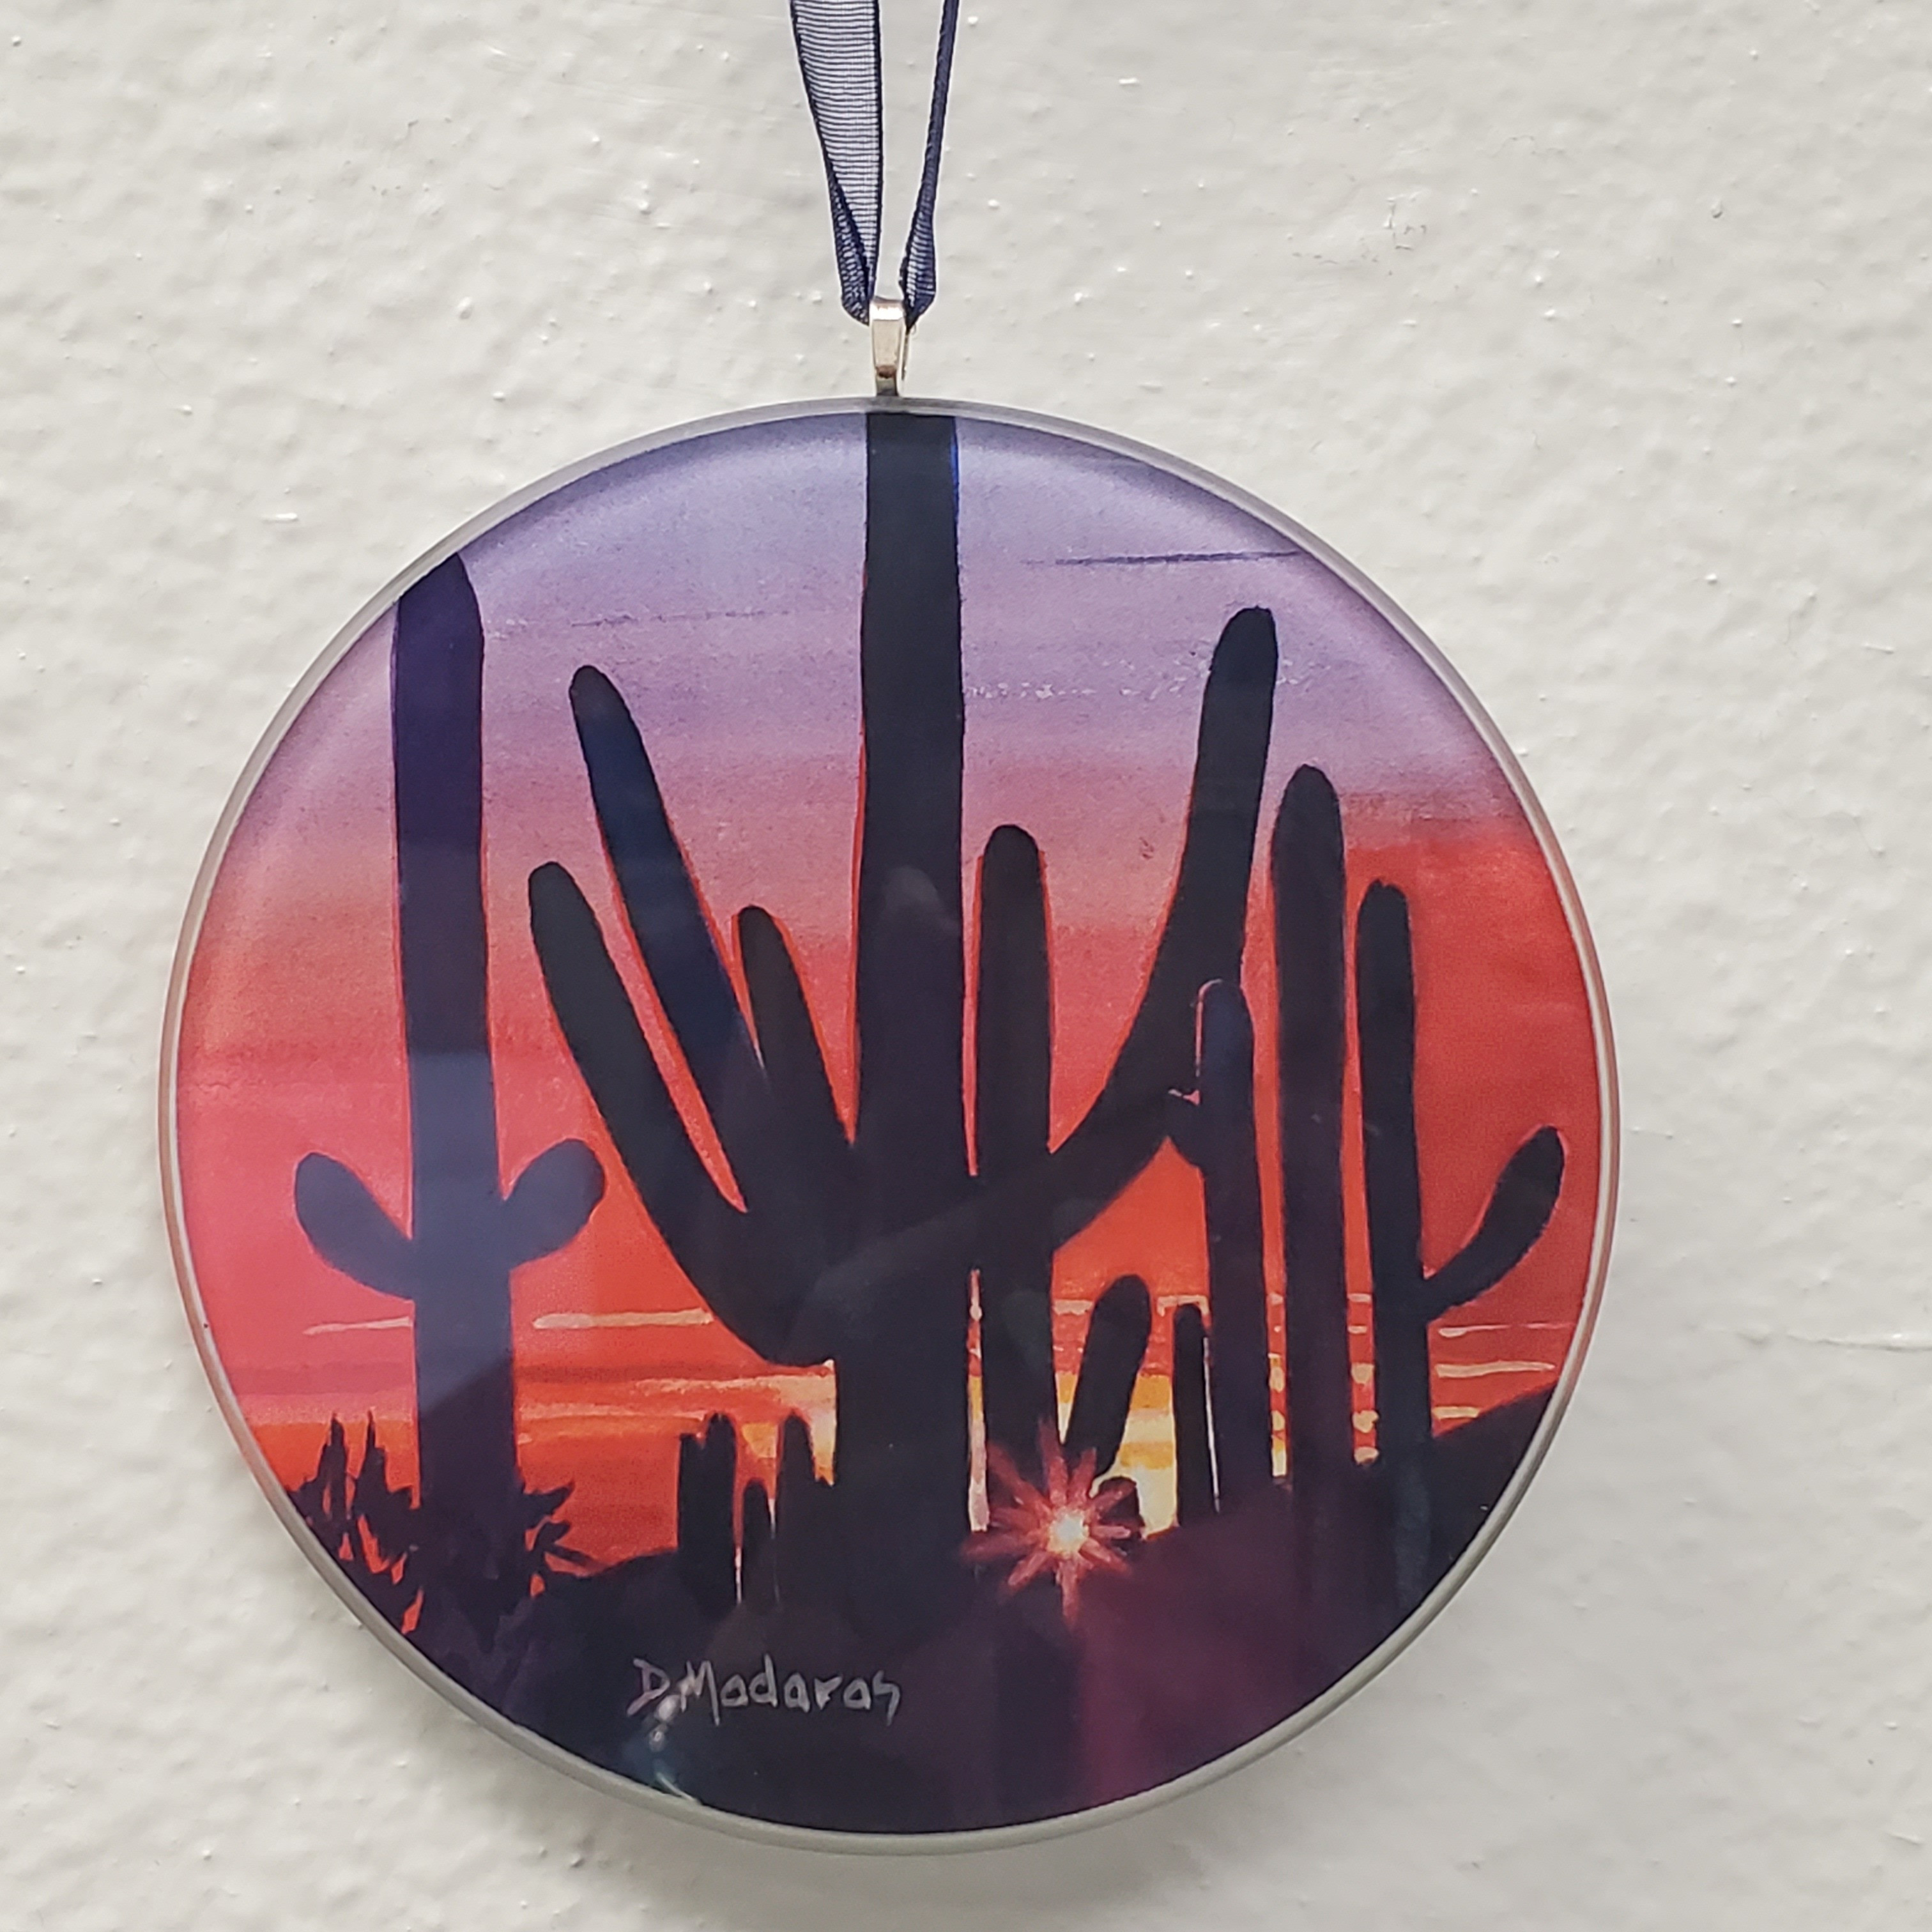 Glass Ornament #1 from Madaras Gallery in Tucson, Az - Cactus red/purple sky - 3" x 4"